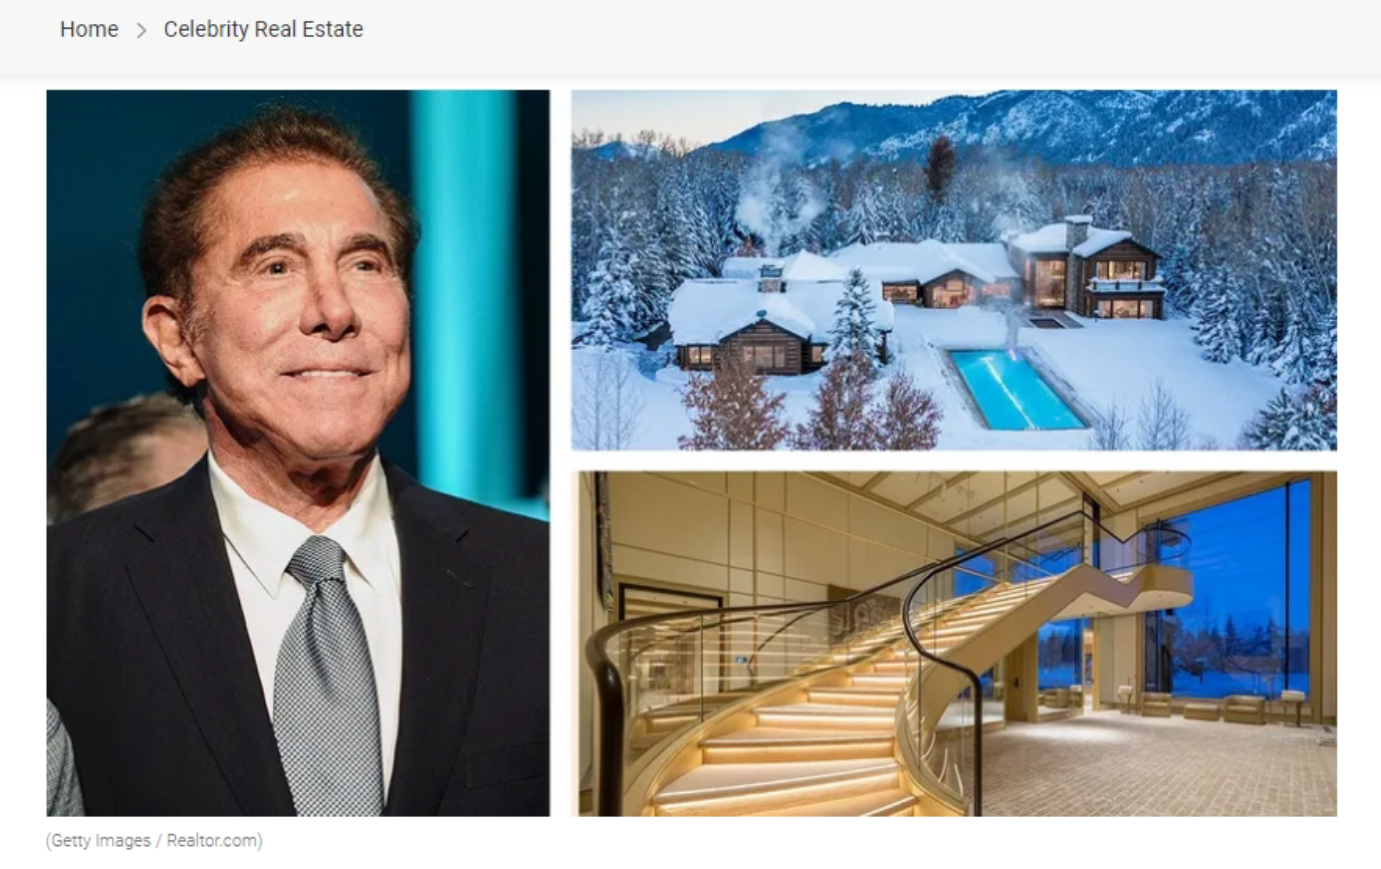 From Realtor.com Casino King Steve Wynn Hopes To Hit It Big With Sale of $27M Idaho Compound for Jean-Luc Andriot blog 040423